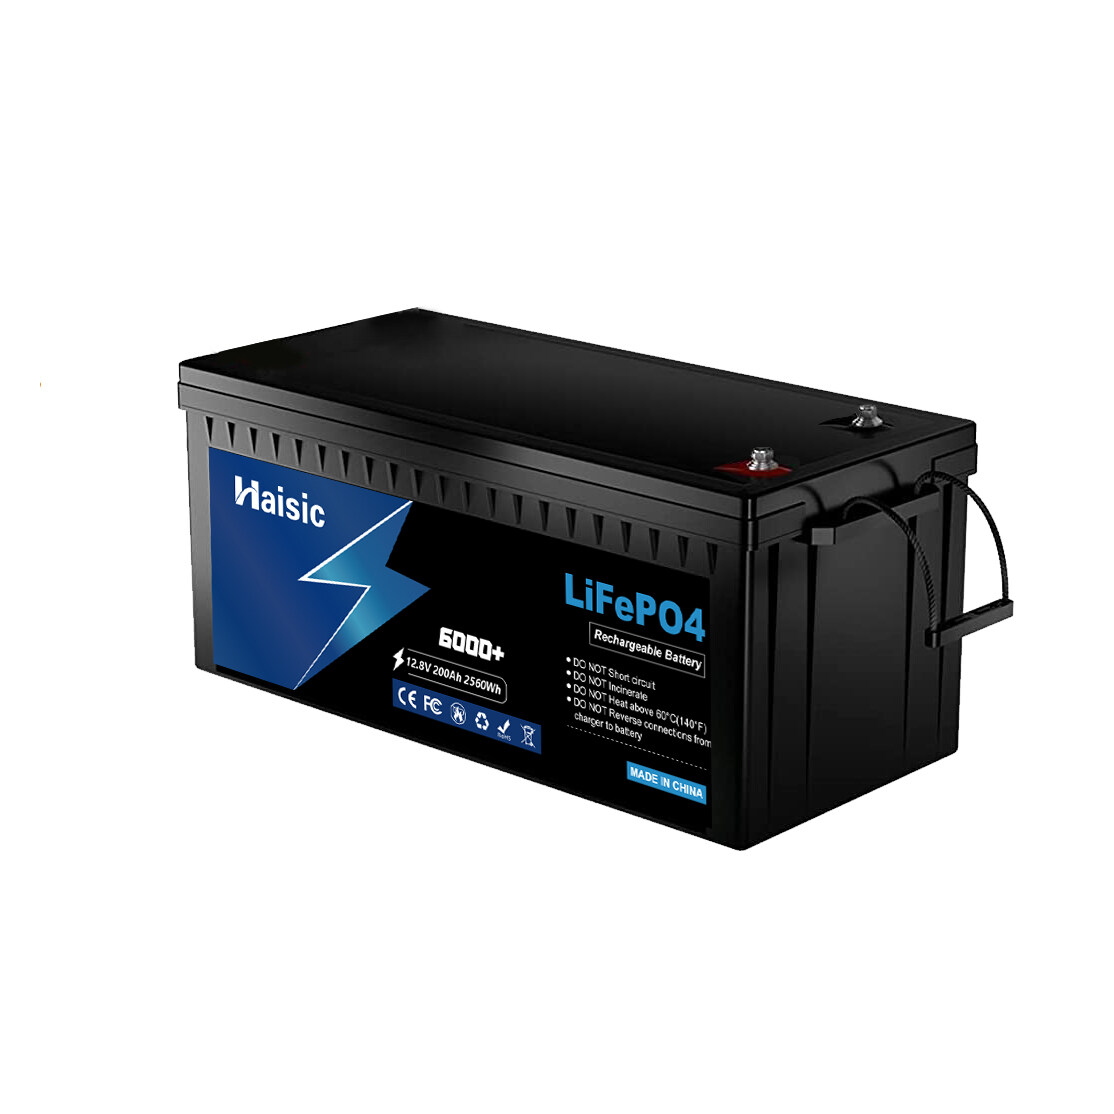 12.8V 2560Wh lifepo4 battery energy storage systems for household use